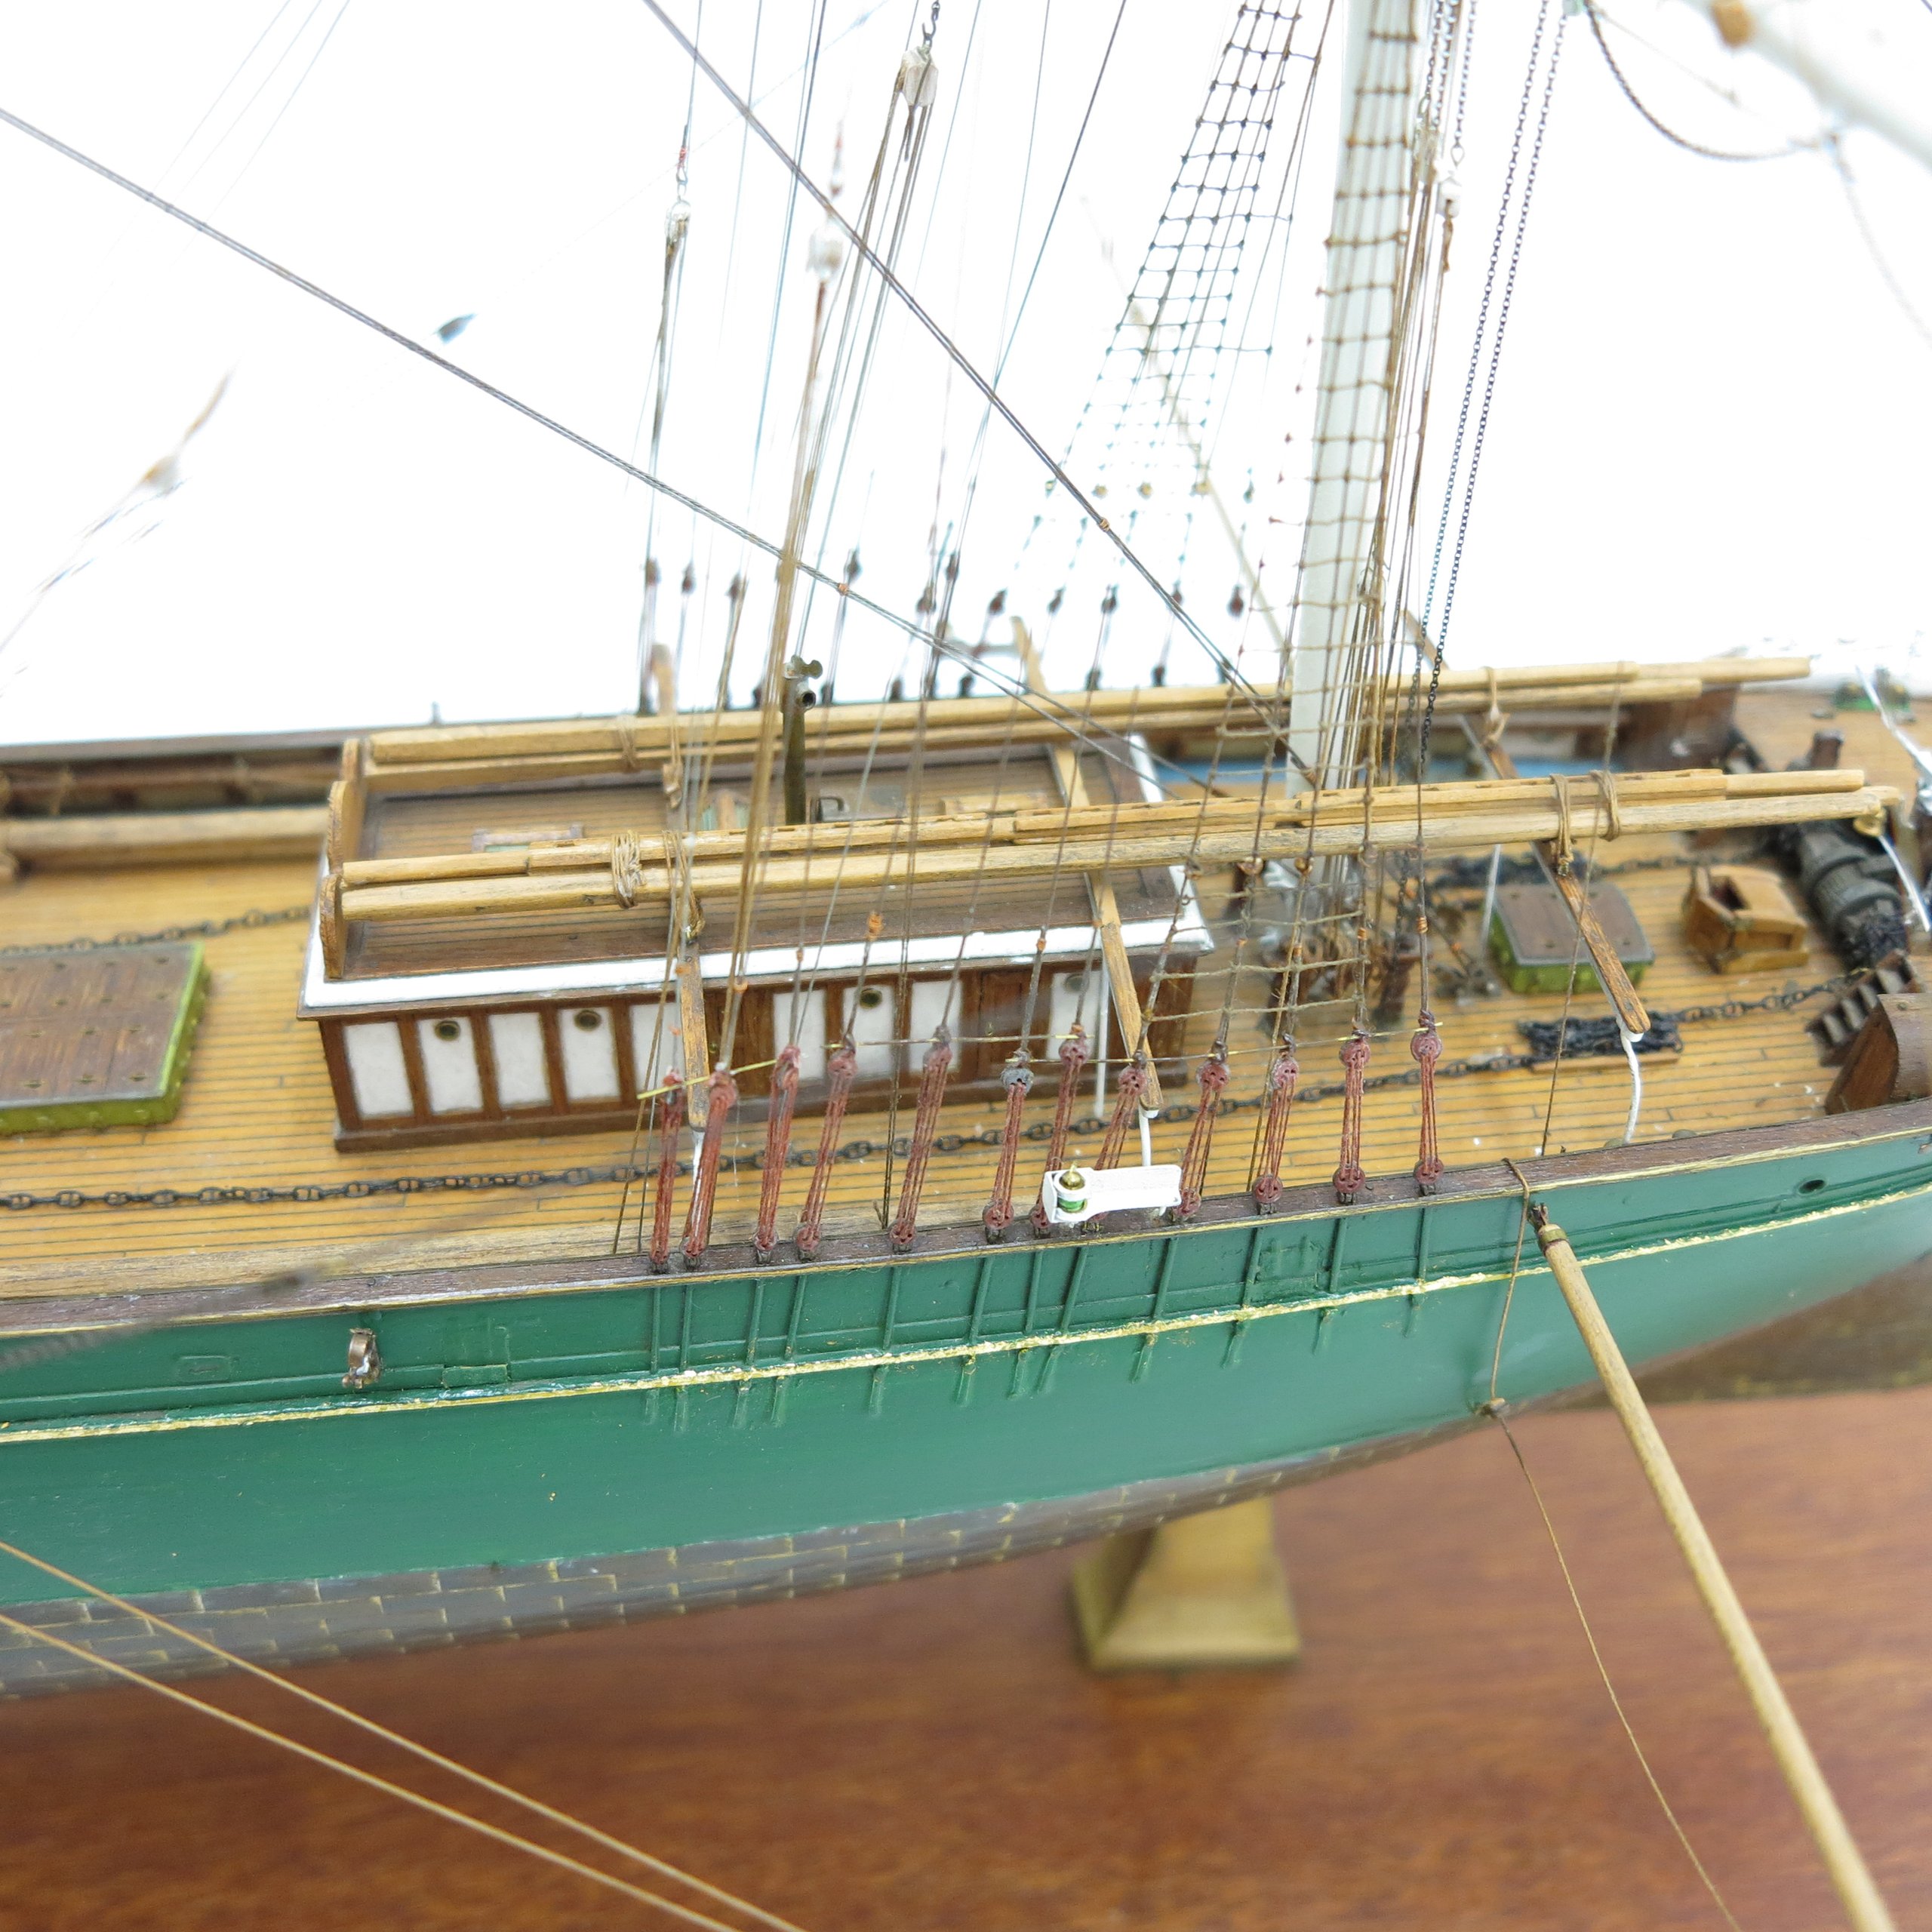 Scale model of the clipper ship "Thermopylae" made by Cyril Hume